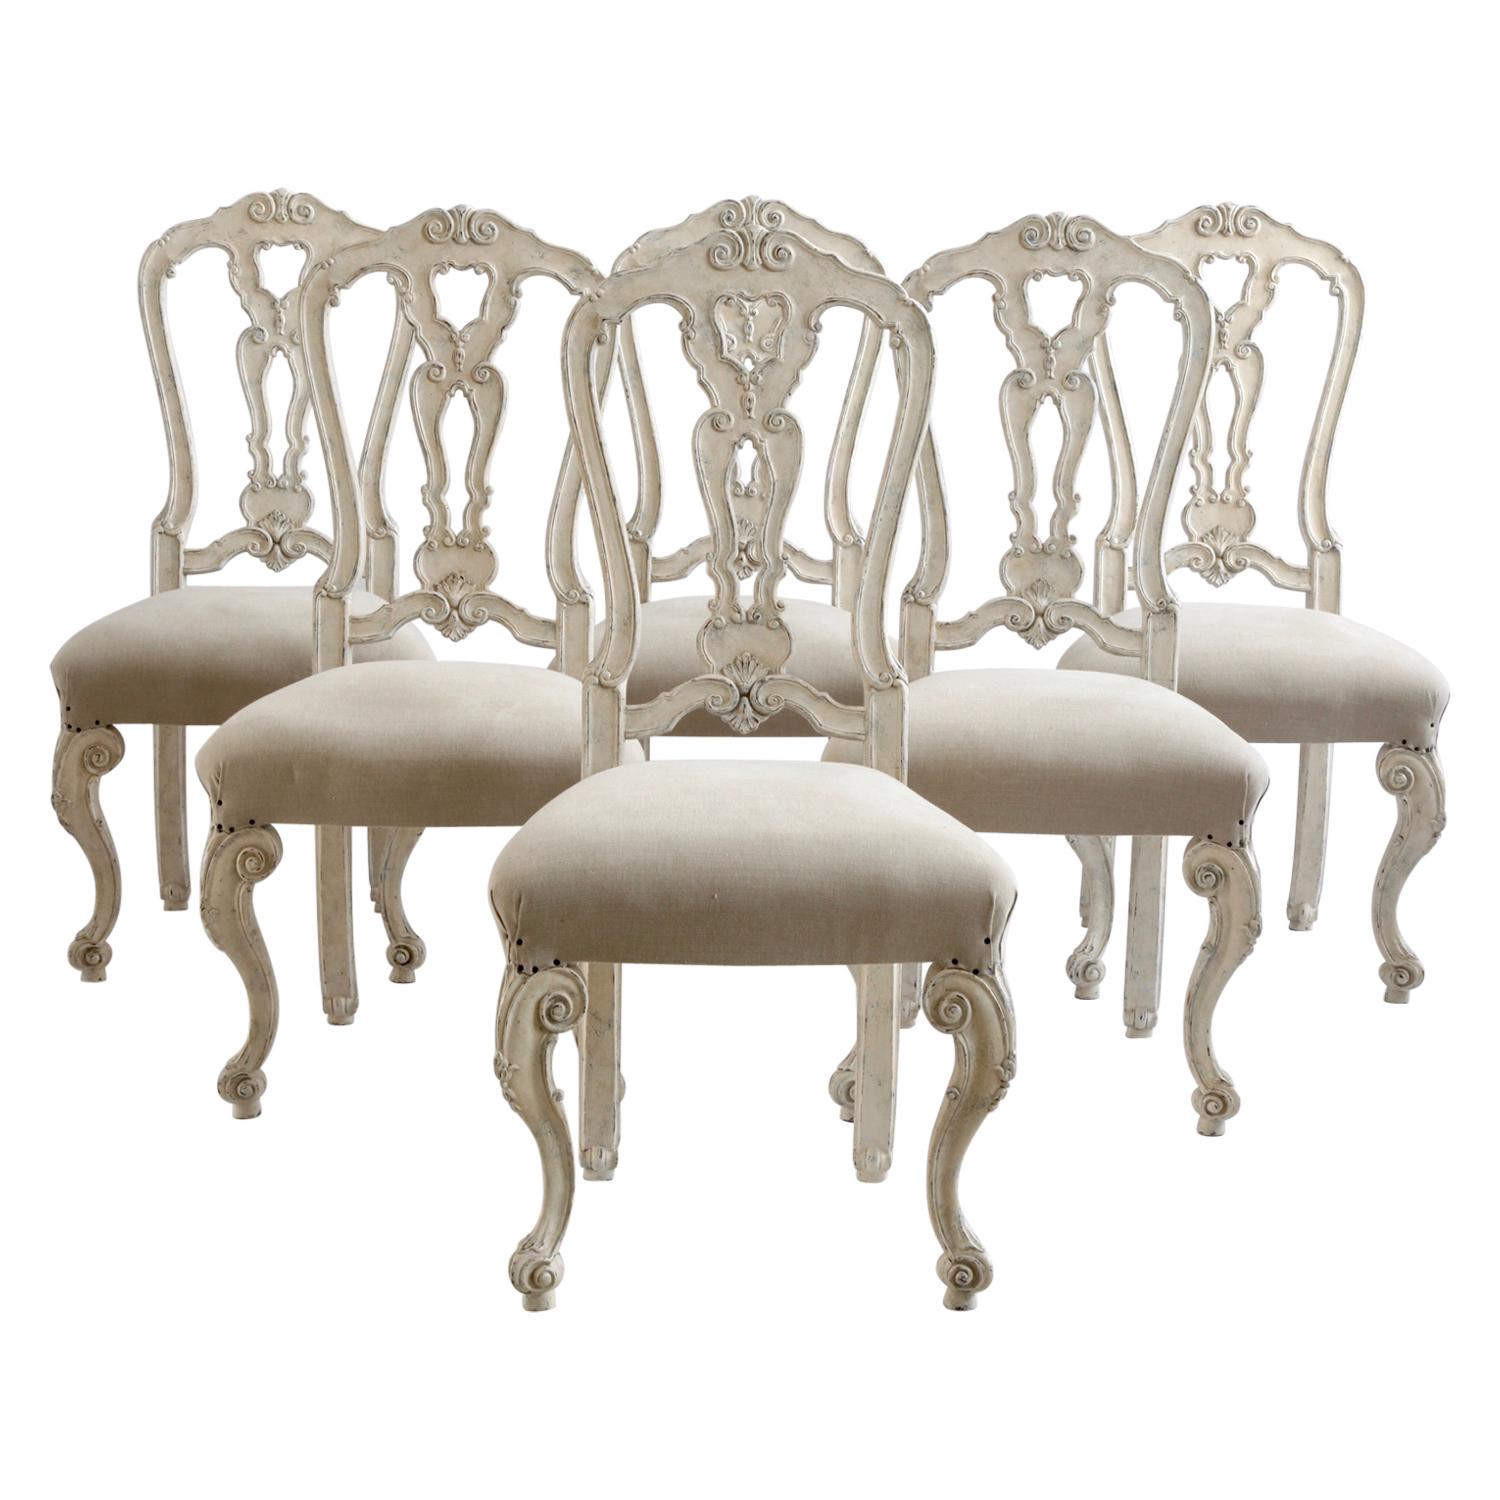 Venetian Set of 6 Dining Chairs Made by La Maison London